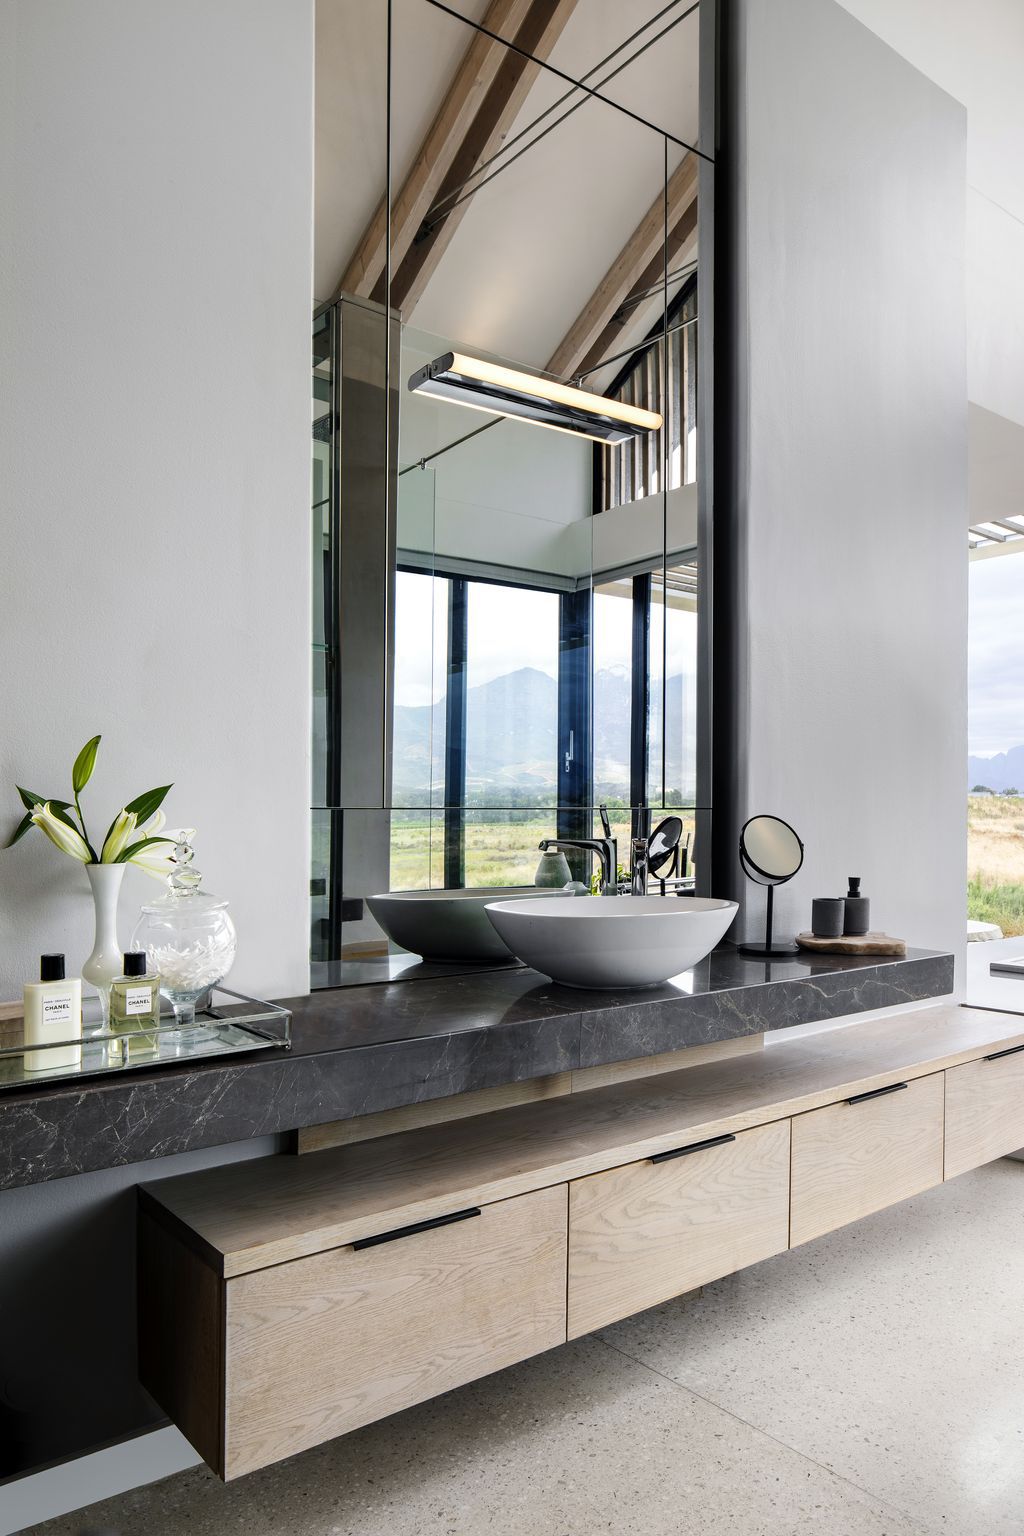 Winelands Villa, Contemporary Oasis in South Africa by ARRCC